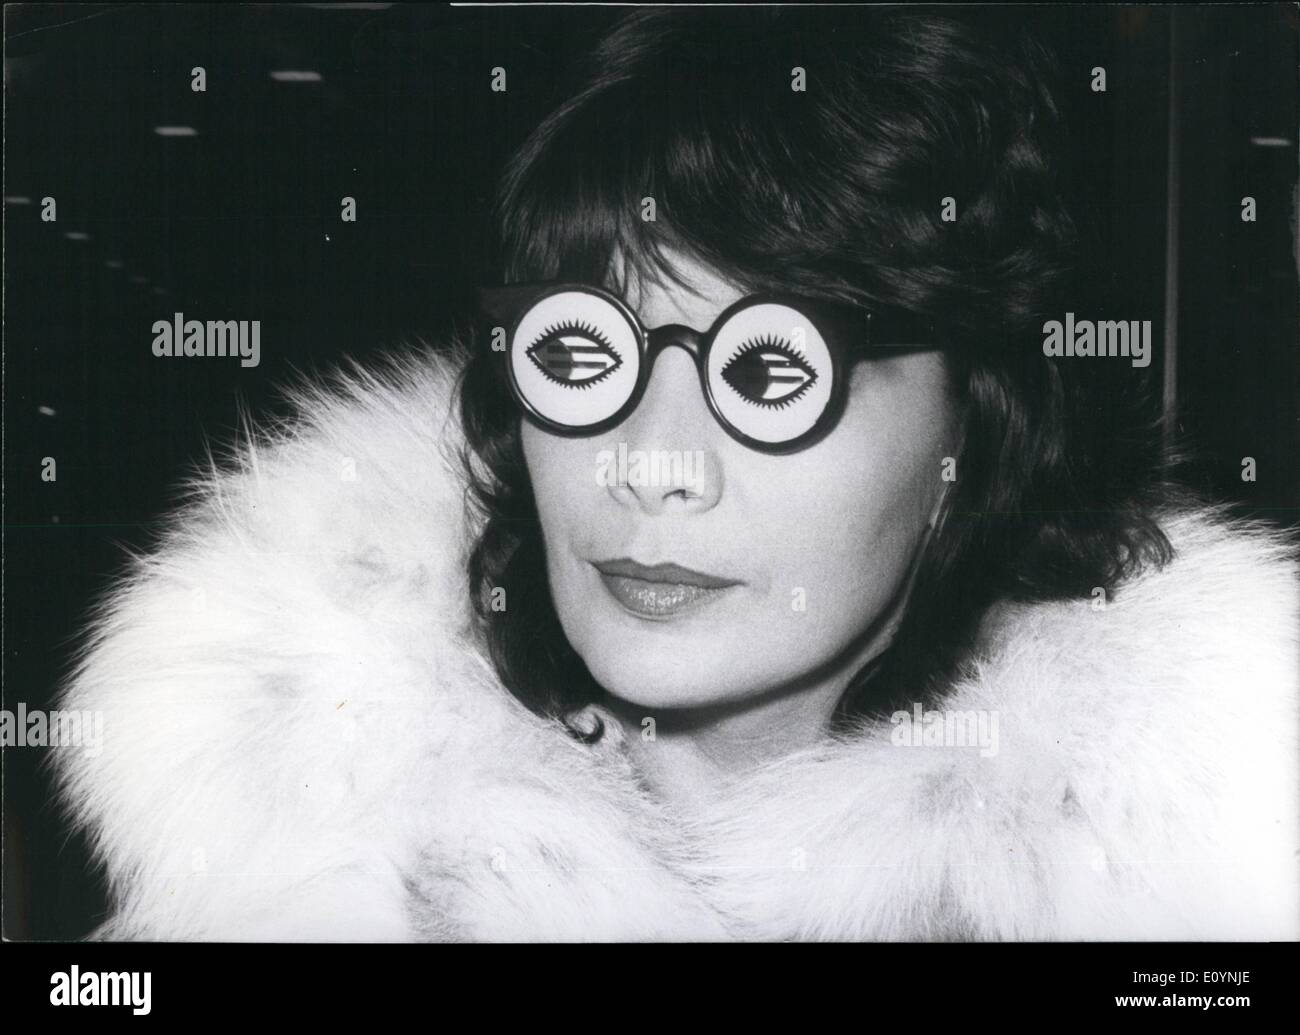 Dec. 12, 1970 - Juliette Greco in Munich for dubbing works. Juliette Greco who hides behind this funny disguise was only joking. The chansonette from Paris presented herself with these pop-clothing (photo) in Munich where she stayed for one day between a voyage to Japan and a tour through France in order to dub in the Bavaria-studios the two Heinz Liesendahl shows Paris After Notes and Corrida Musical in English. She got the funny glasses from a fan, and immediately tried it! Keystone Photo, December 2nd, 1970 Stock Photo